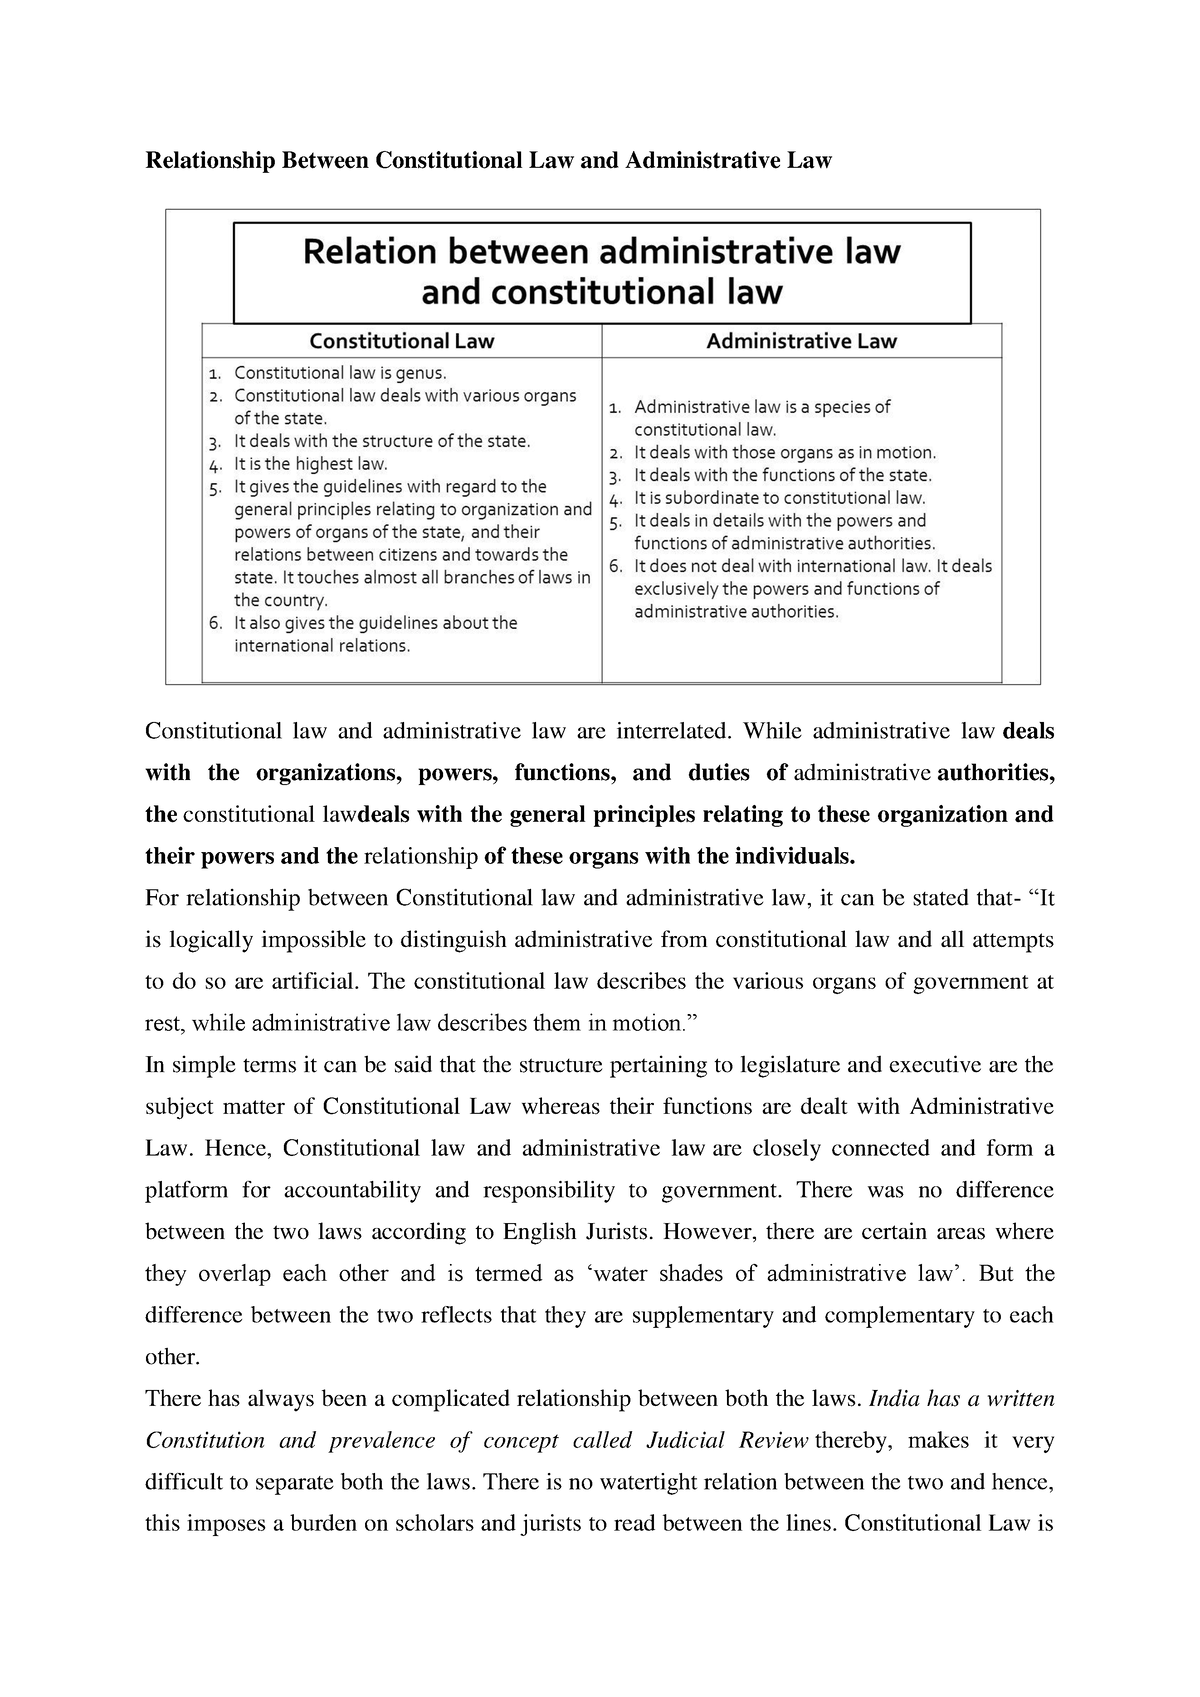 phd thesis on constitutional law